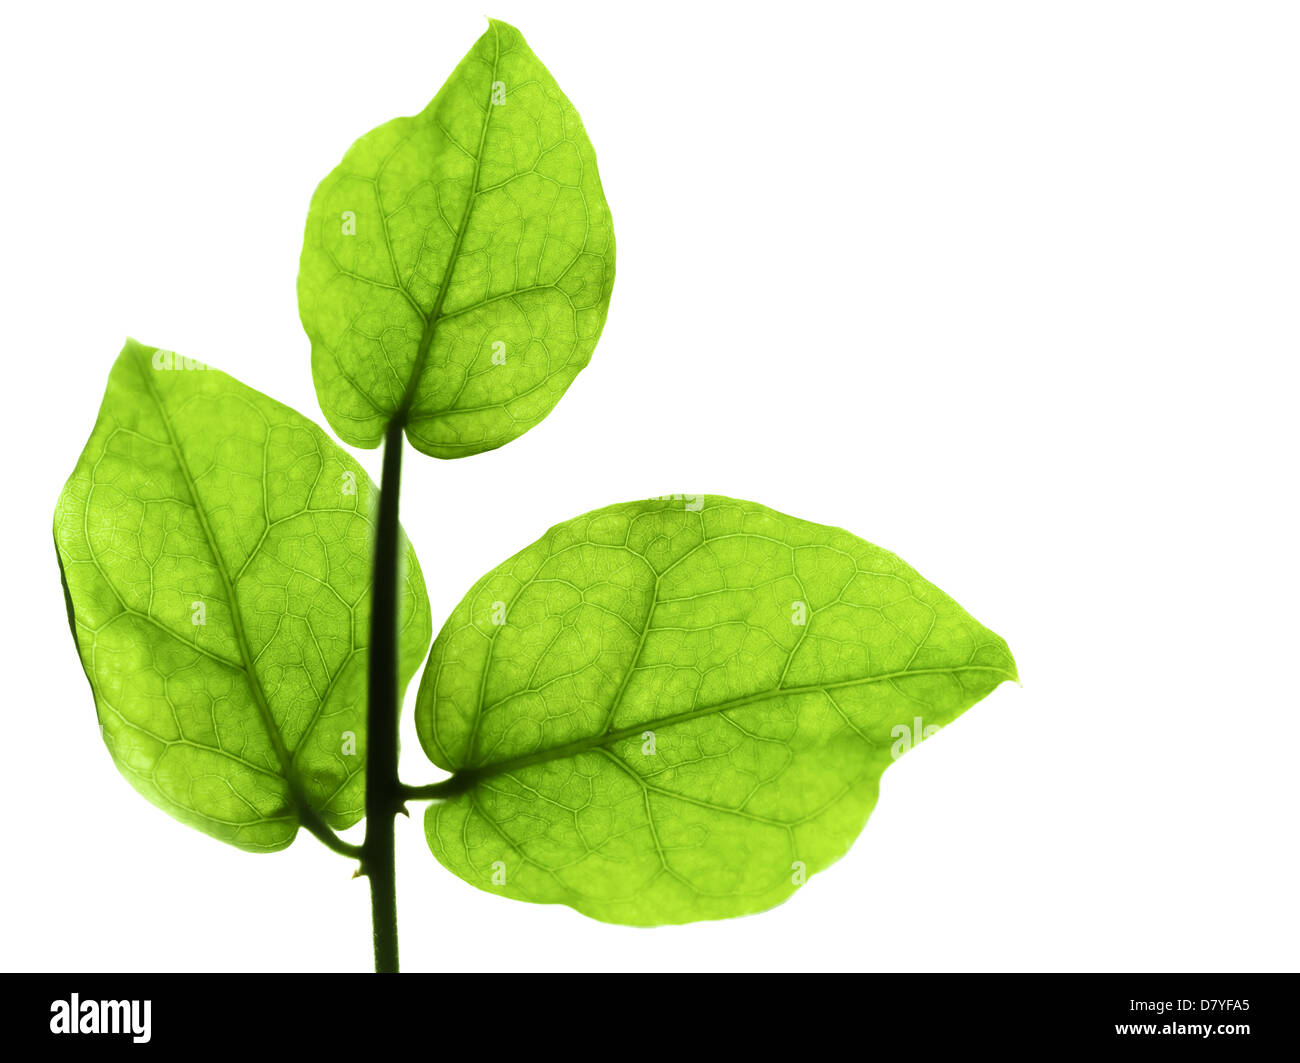 Macro photo of three green leaves on branch isolated on white Stock Photo